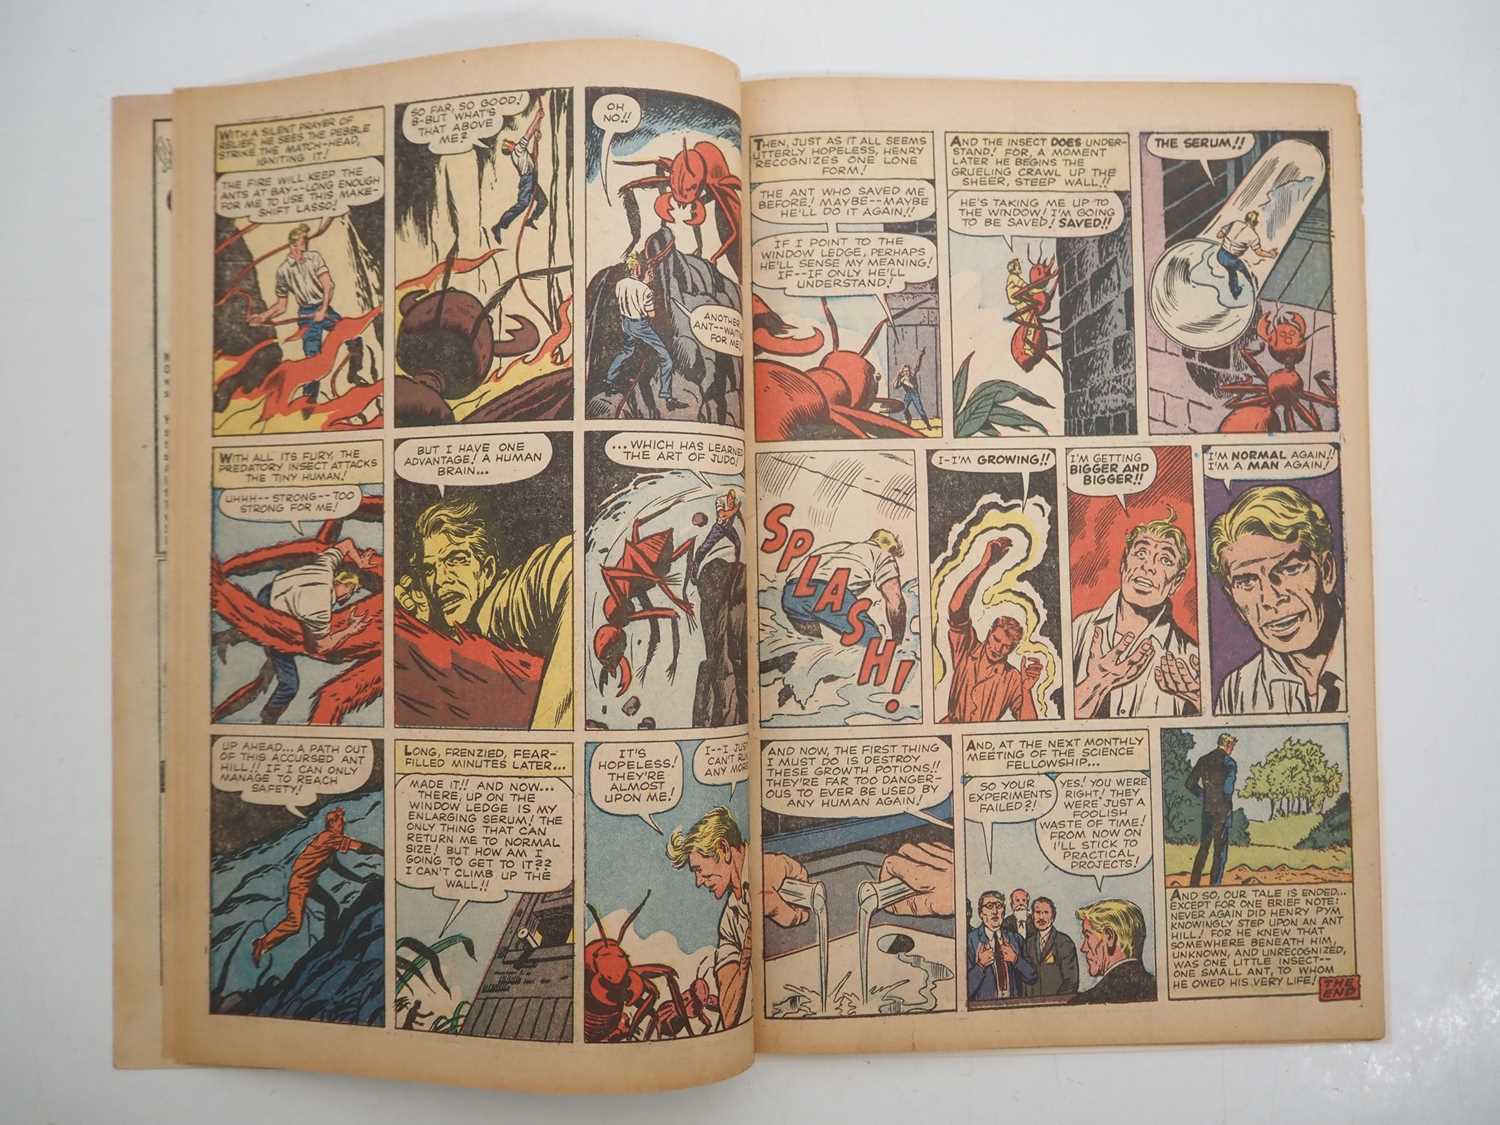 TALES TO ASTONISH #27 (1962 - MARVEL) - First appearance of Ant-Man (Henry Pym) + Currently #12 on - Image 10 of 27